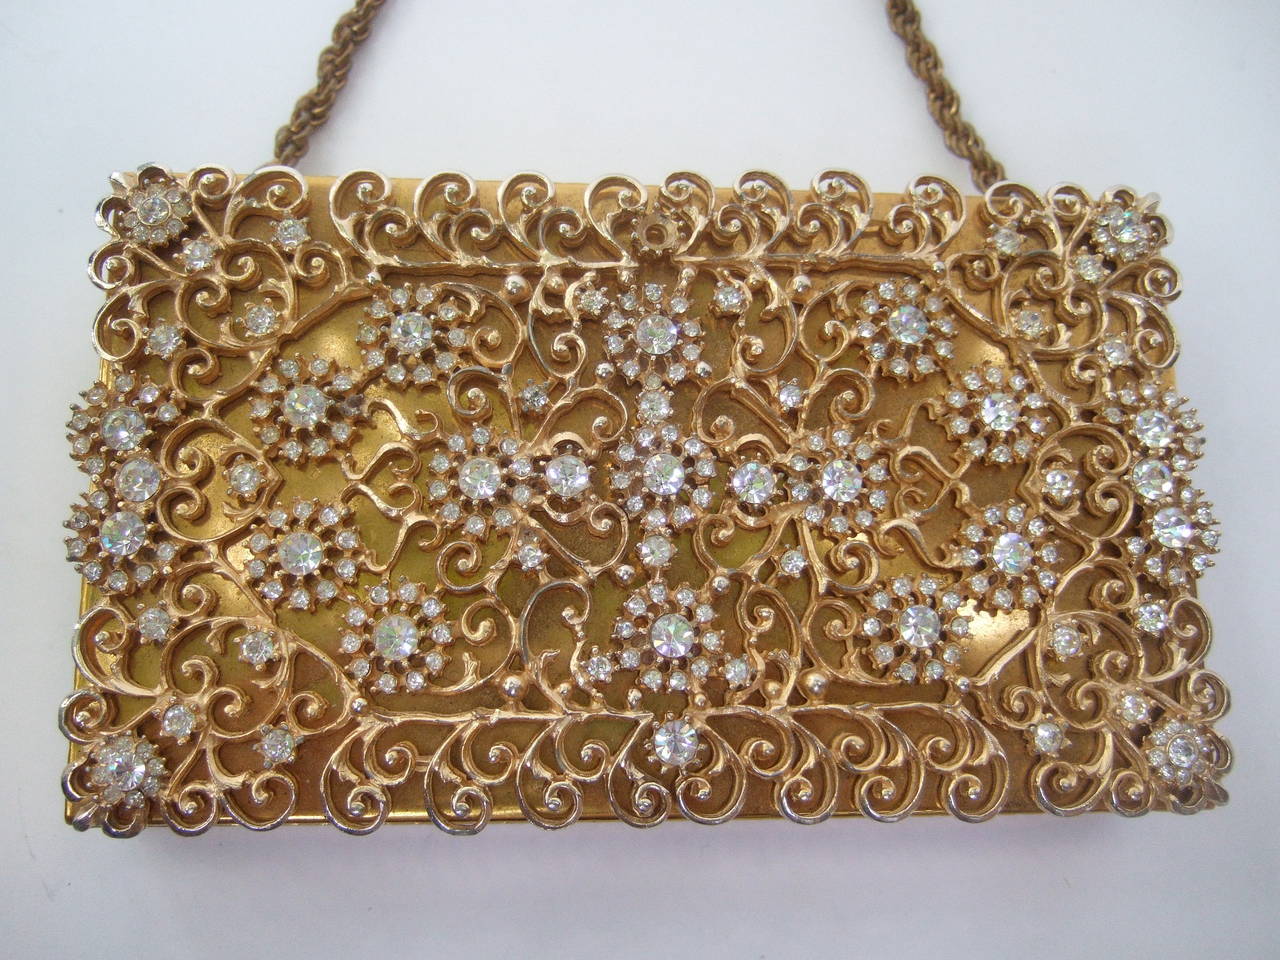 Opulent crystal gilt metal evening bag case designed by Evans c 1960
The elegant gilt metal case is encrusted with glittering diamante 
crystals on the front panel. The crystals are designed in circular
clusters emulating flower pedals 

The